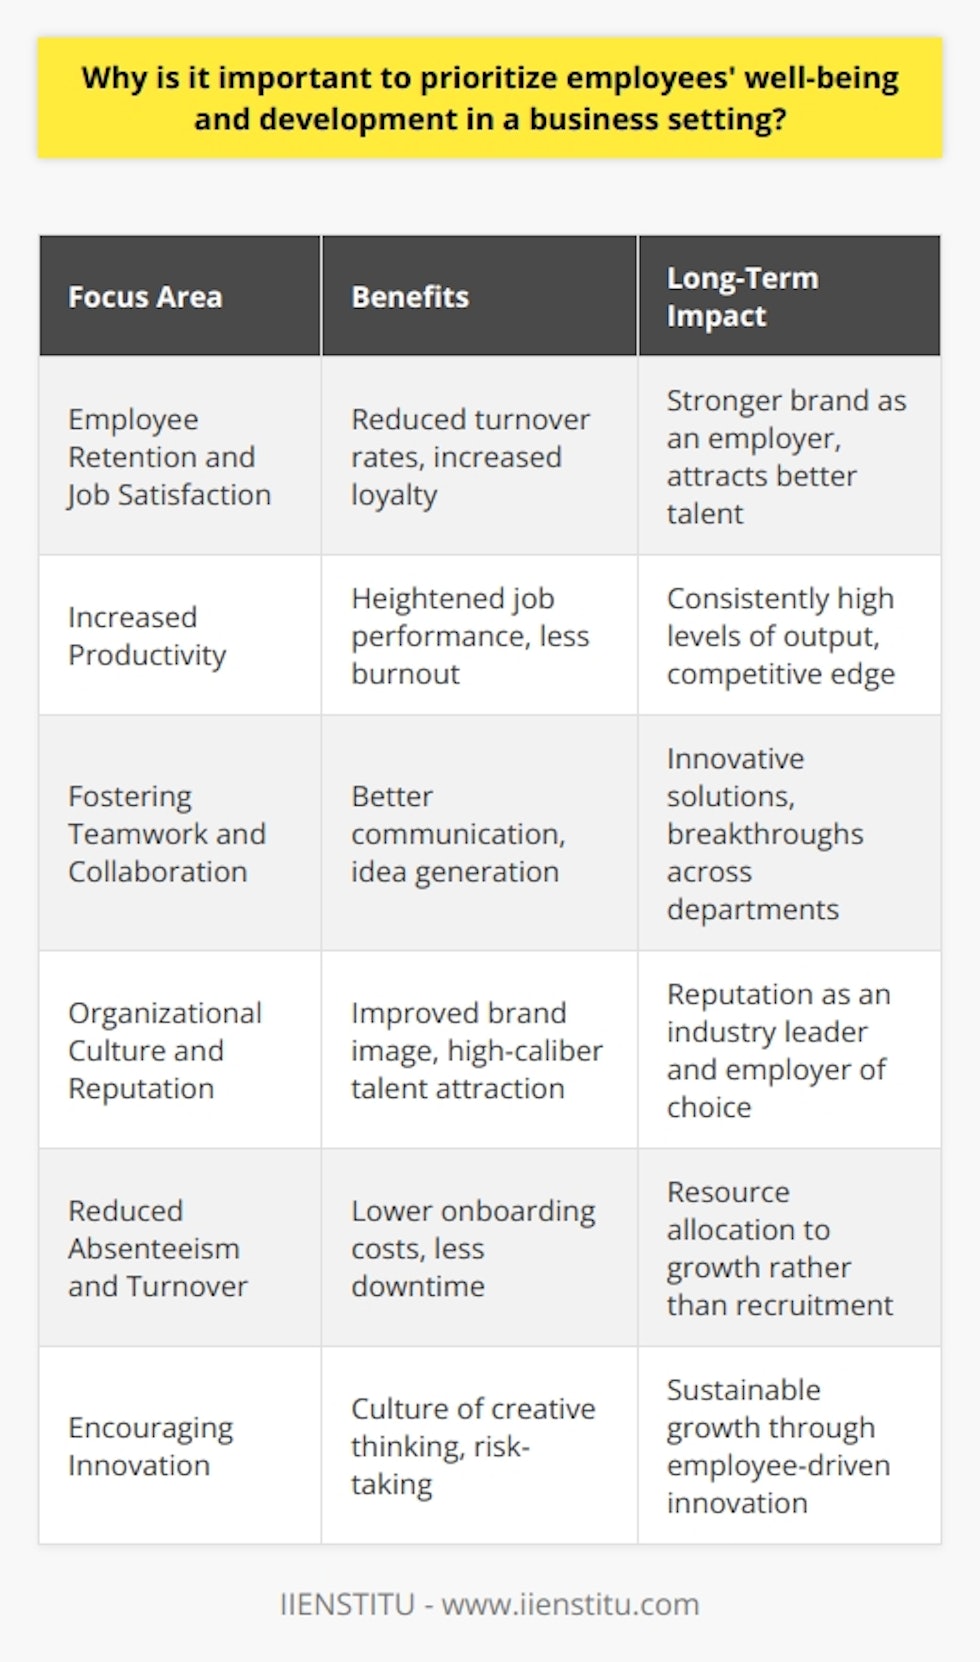 Prioritizing employees' well-being and development is not merely an act of corporate responsibility; it's a strategic imperative that drives long-term success for businesses. A commitment to nurturing employees' overall health, happiness, and growth is a game-changer in the corporate world, offering a multitude of benefits that echo across all facets of company performance.**Employee Retention and Job Satisfaction**The modern workforce has shifted focus from job security to seeking workplaces that align with personal values and offer growth. By investing in their well-being, companies are telling their employees that they matter beyond their immediate output. This fosters a culture of loyalty, significantly reducing turnover rates. Satisfied employees champion the company's mission, serving as brand ambassadors that can attract even more talented recruits.**Increased Productivity**Content workers are productive workers. Employees who have access to development programs and resources tend to have higher job performance as their skills are enhanced, and they can keep up with industry trends. A culture that encourages work-life balance and addresses well-being concerns minimizes burnout, enabling employees to operate at their peak productivity levels on a consistent basis.**Fostering Teamwork and Collaboration**A commitment to well-being and development creates an inclusive environment where workers feel secure and valued. This sense of safety is conducive to open communication, knowledge sharing, and cross-pollination of ideas. When employees from different departments or backgrounds feel comfortable collaborating, the resulting synergy can lead to groundbreaking innovations and solutions.**Organizational Culture and Reputation**A company that visibly prioritizes its workforce establishes itself as an employer of choice, making it easier to attract high-caliber talent. Prospective employees often research a company's culture and development programs. When they see a robust offering that supports employee growth, they're more likely to favor such an employer. Moreover, a people-first culture often results in endorsements from current employees, validating the company's reputation.**Reduced Absenteeism and Turnover**Chronic stress and work-related health issues contribute to absenteeism. By addressing well-being, organizations can proactively mitigate these risks. Moreover, employees who see a clear development path within their organization are less likely to leave. These factors combined reduce recruitment and onboarding costs significantly, allowing companies to allocate resources elsewhere.**Encouraging Innovation**When employees feel psychologically secure, they're more inclined to take calculated risks and innovate. Development programs that encourage employees to think creatively can be the breeding grounds for the next big idea. Employee-driven innovation creates a virtuous cycle where successful initiatives propel the company forward, and in turn, the company invests further in its employees.**Conclusion**In conclusion, the importance of prioritizing employees' well-being and development in a business setting cannot be overstated. The culture created by addressing these vital aspects brings quantifiable benefits, such as improved job satisfaction, productivity, and reduced turnover, as well as intangible ones like a better organizational reputation. As businesses move through evolving landscapes, the need for adaptable, motivated, and well-cared-for employees is more crucial than ever. Those organizations that recognize and support their workforce in totality position themselves at the forefront of innovation and set a standard for excellence in the corporate realm.